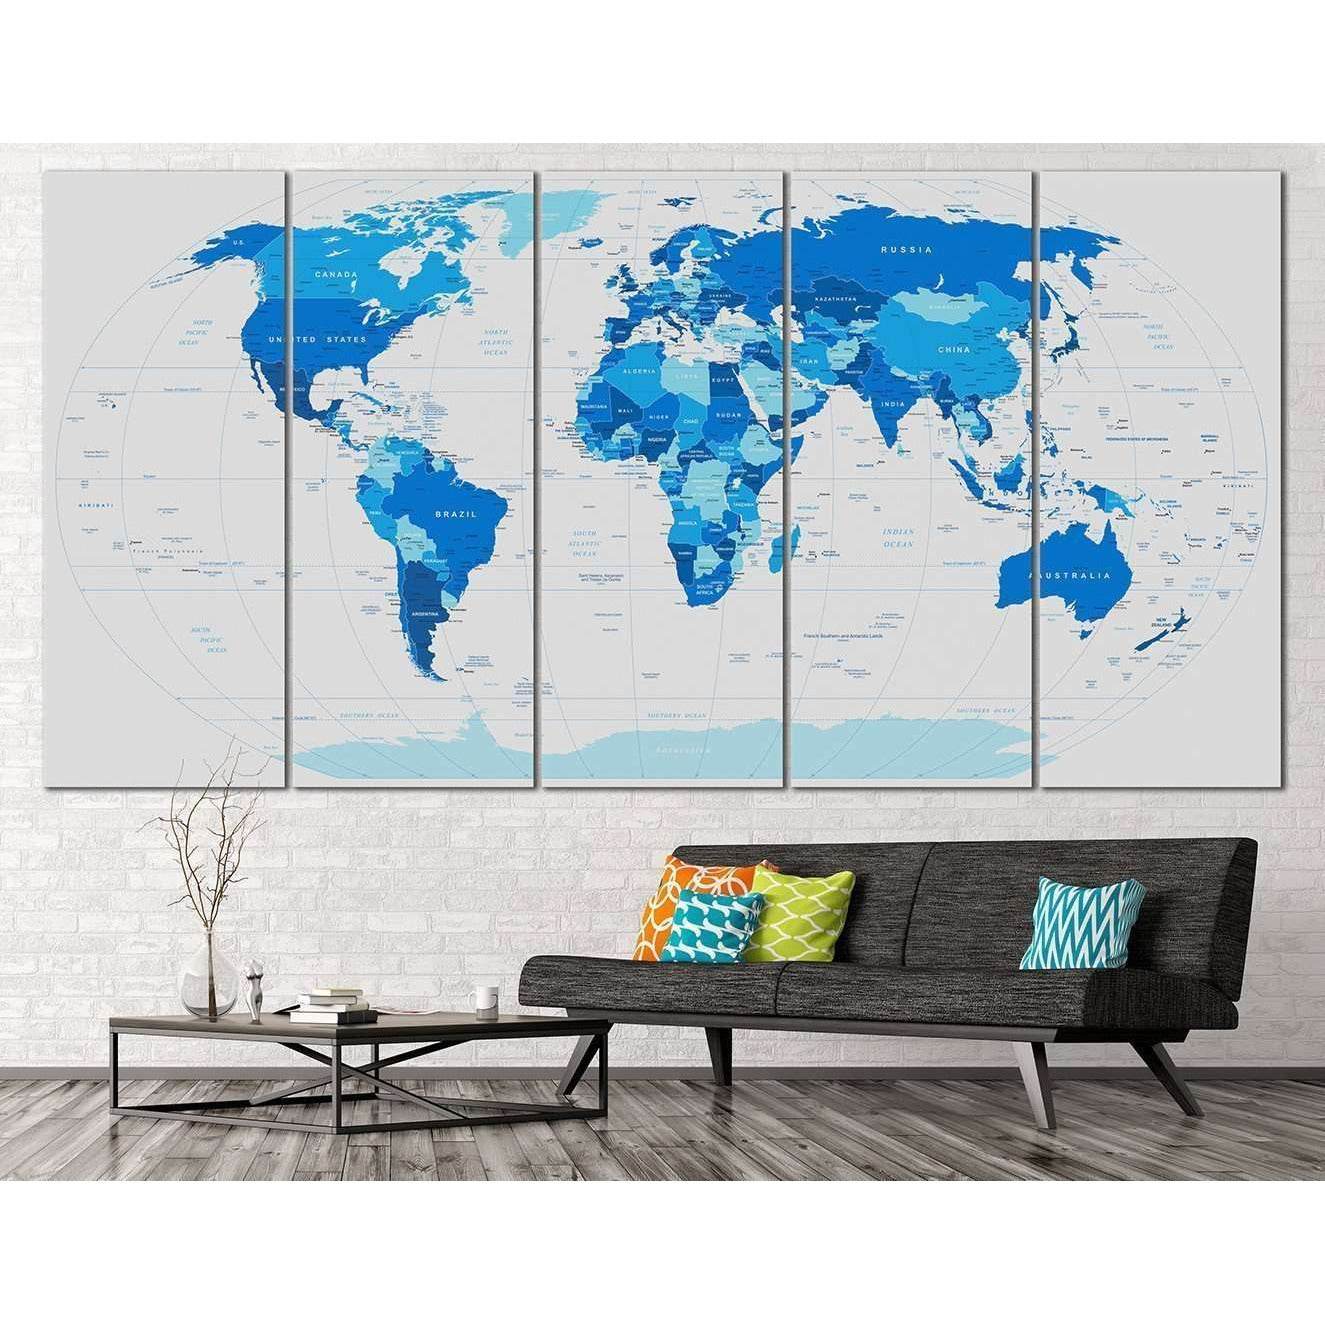 Blue World Map with City labels Canvas Art PrintDecorate your walls with a stunning Blue World Map Canvas Art Print from the world's largest art gallery. Choose from thousands of Map artworks with various sizing options. Choose your perfect art print to c